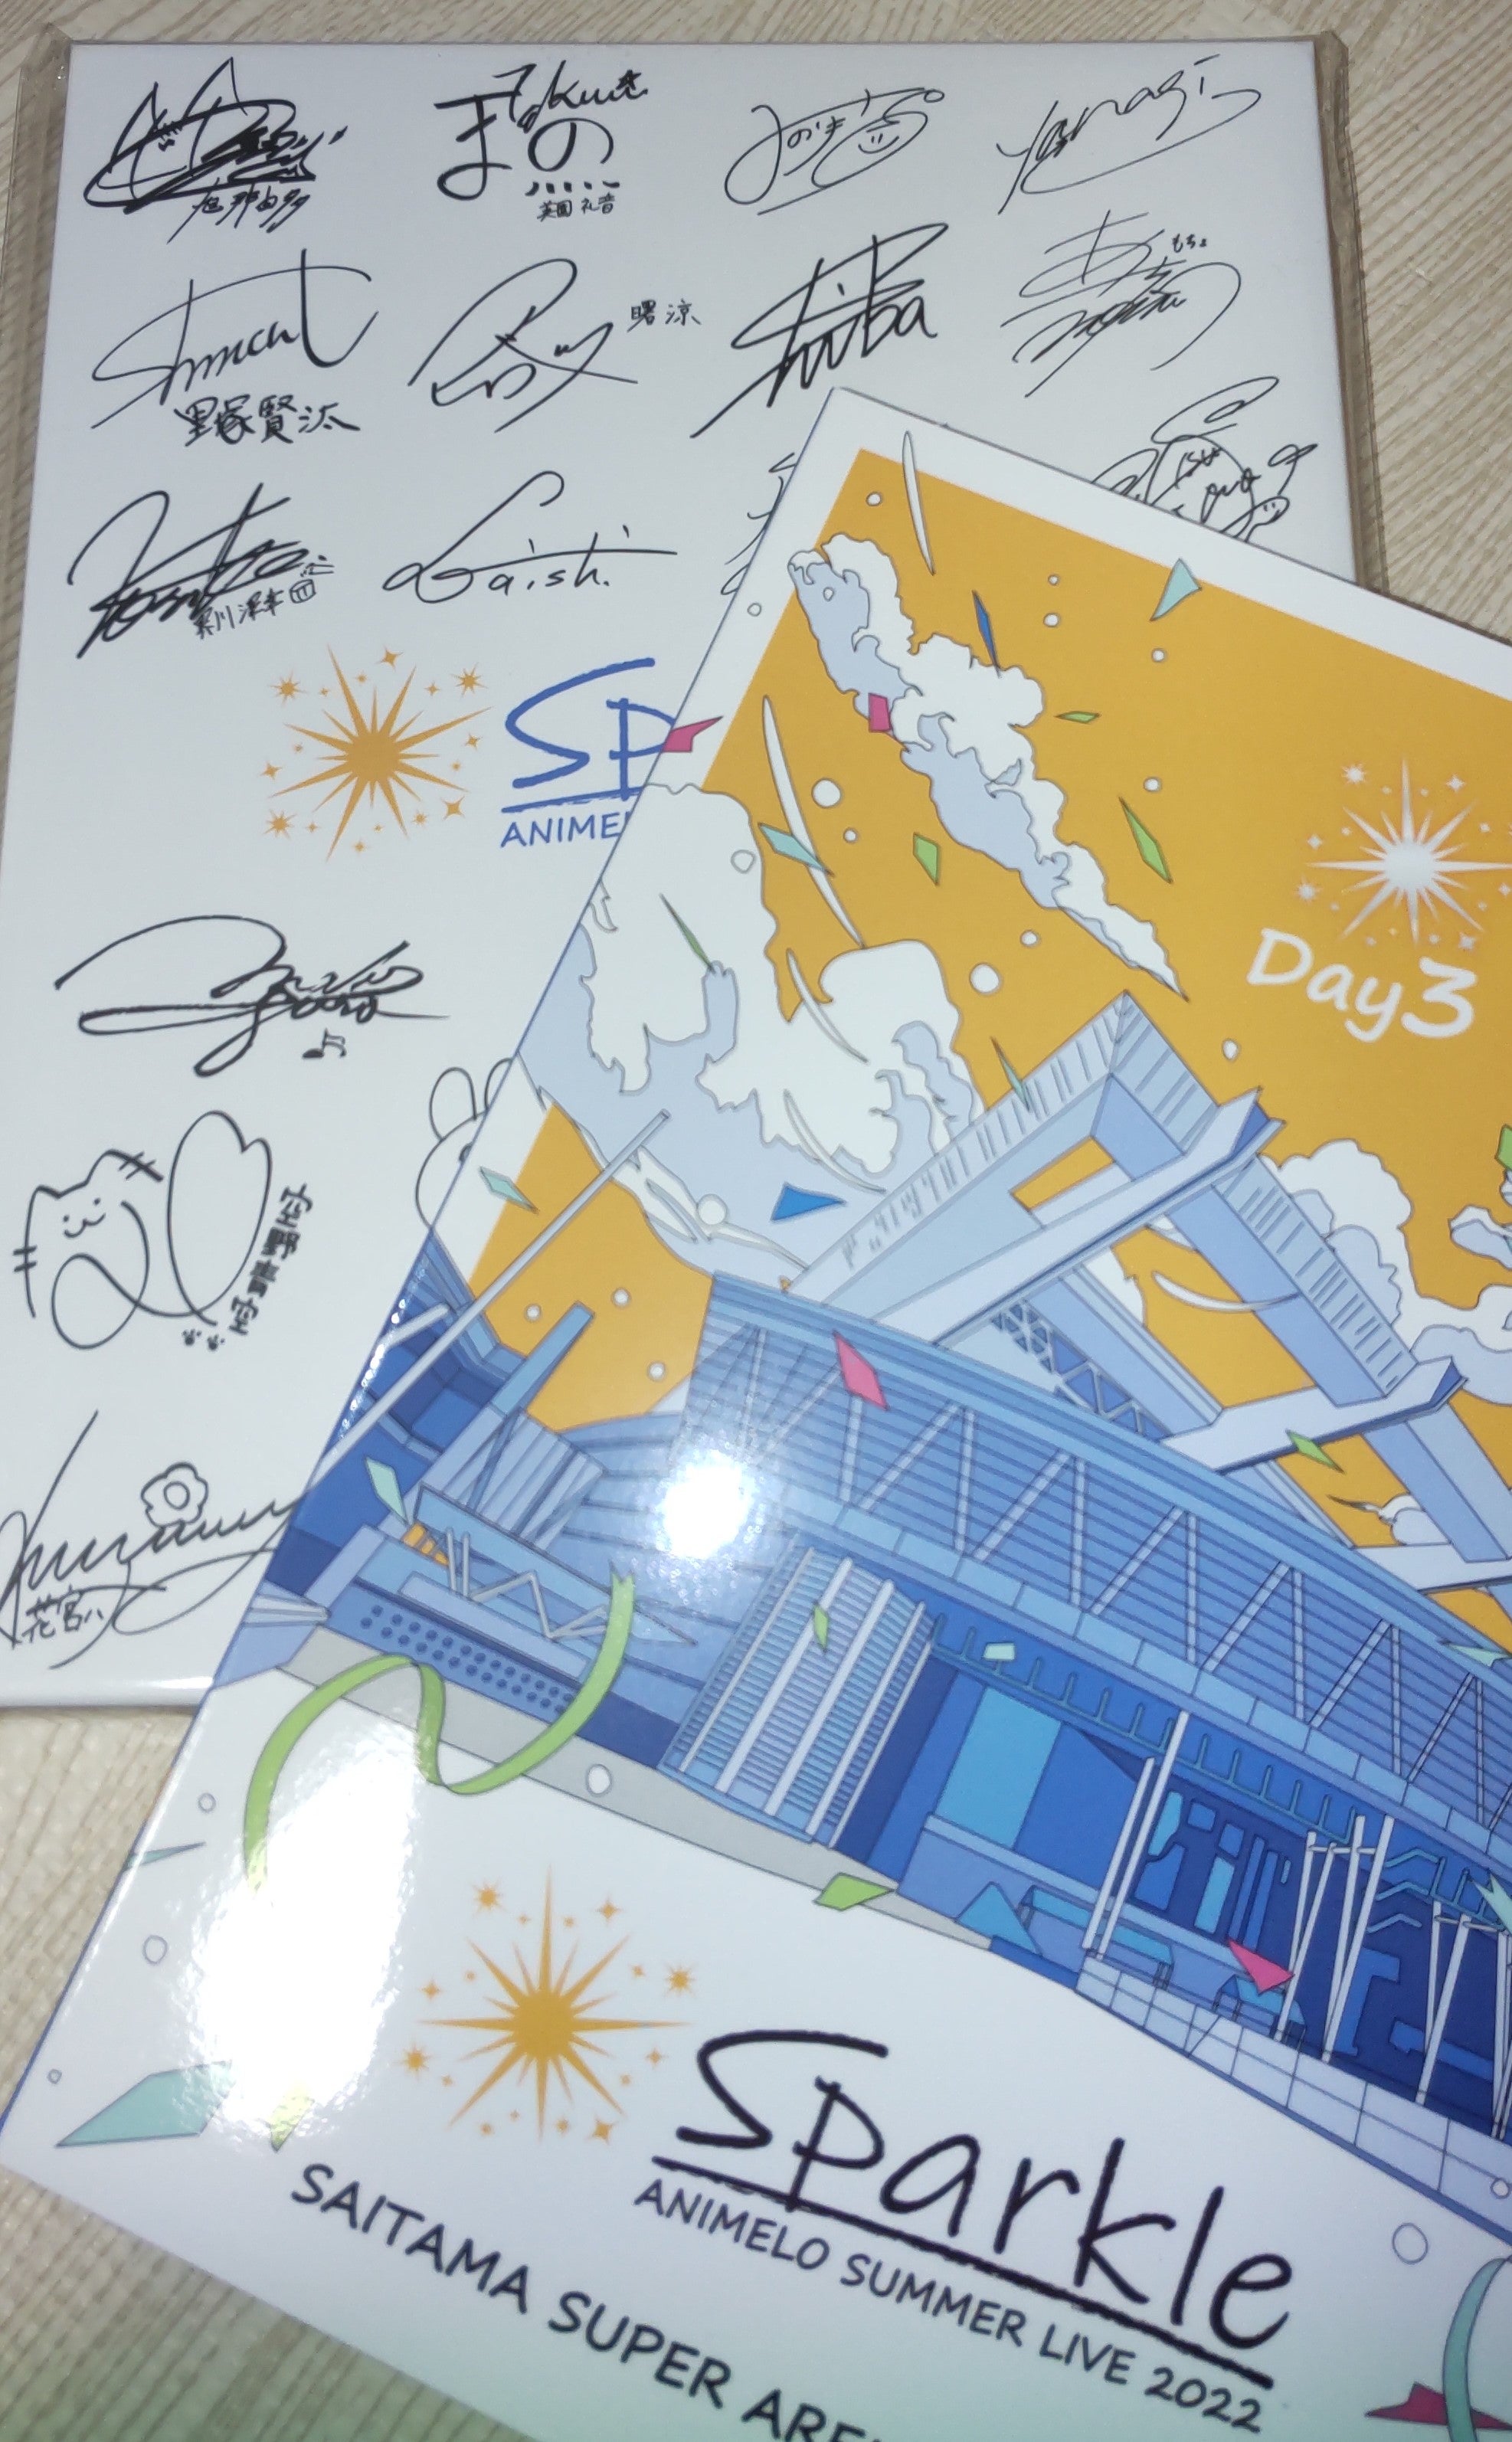 Blu-ray】Animelo Summer Live 2022 -Sparkle- DAY3 | 5th WANDS